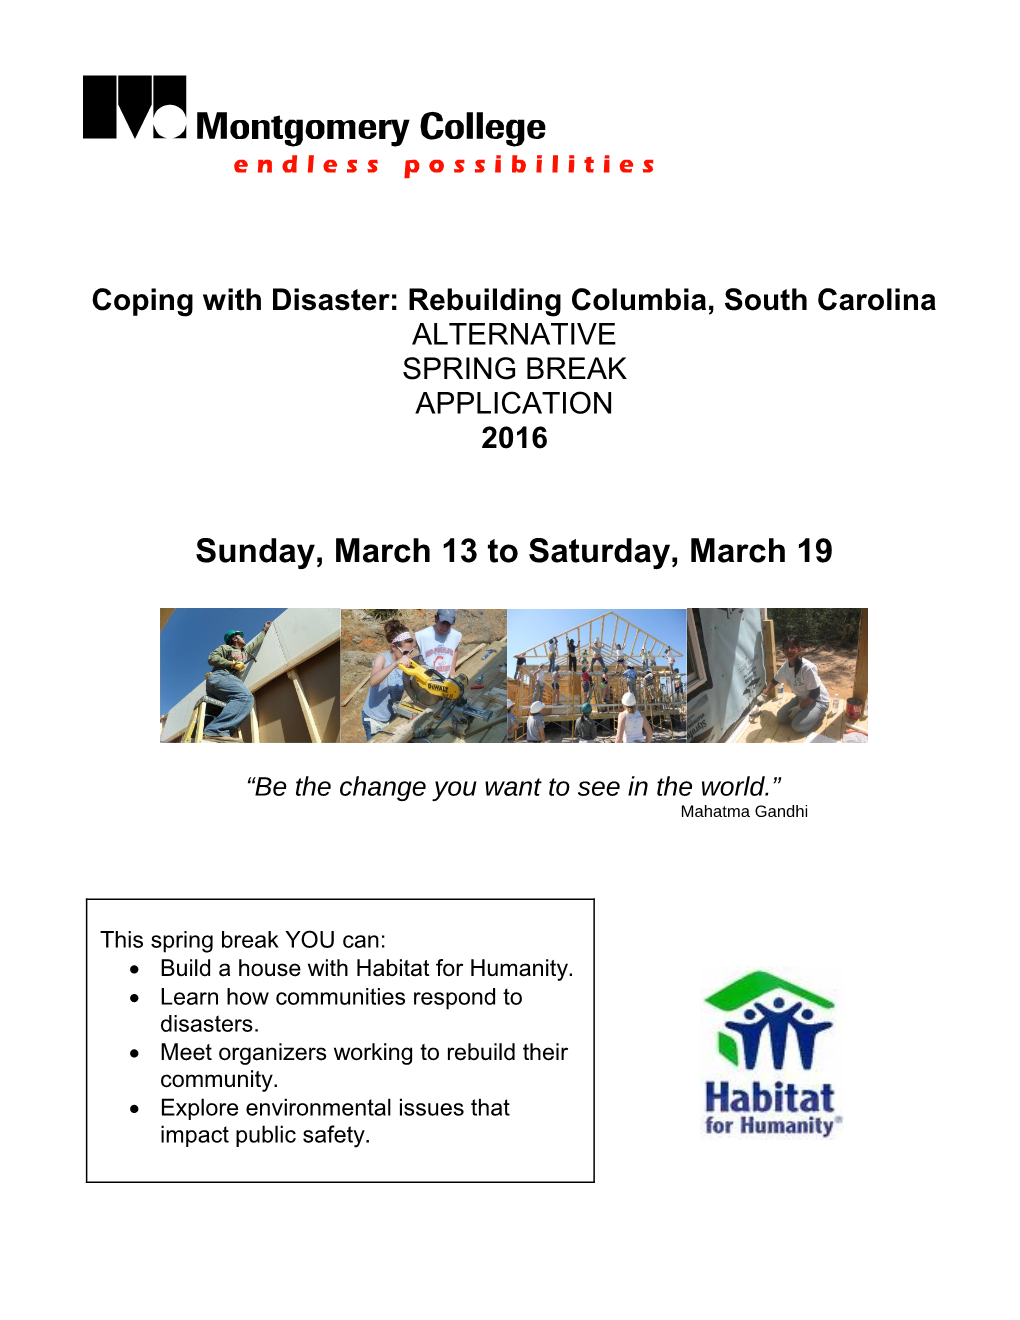 Coping with Disaster: Rebuilding Columbia, South Carolina